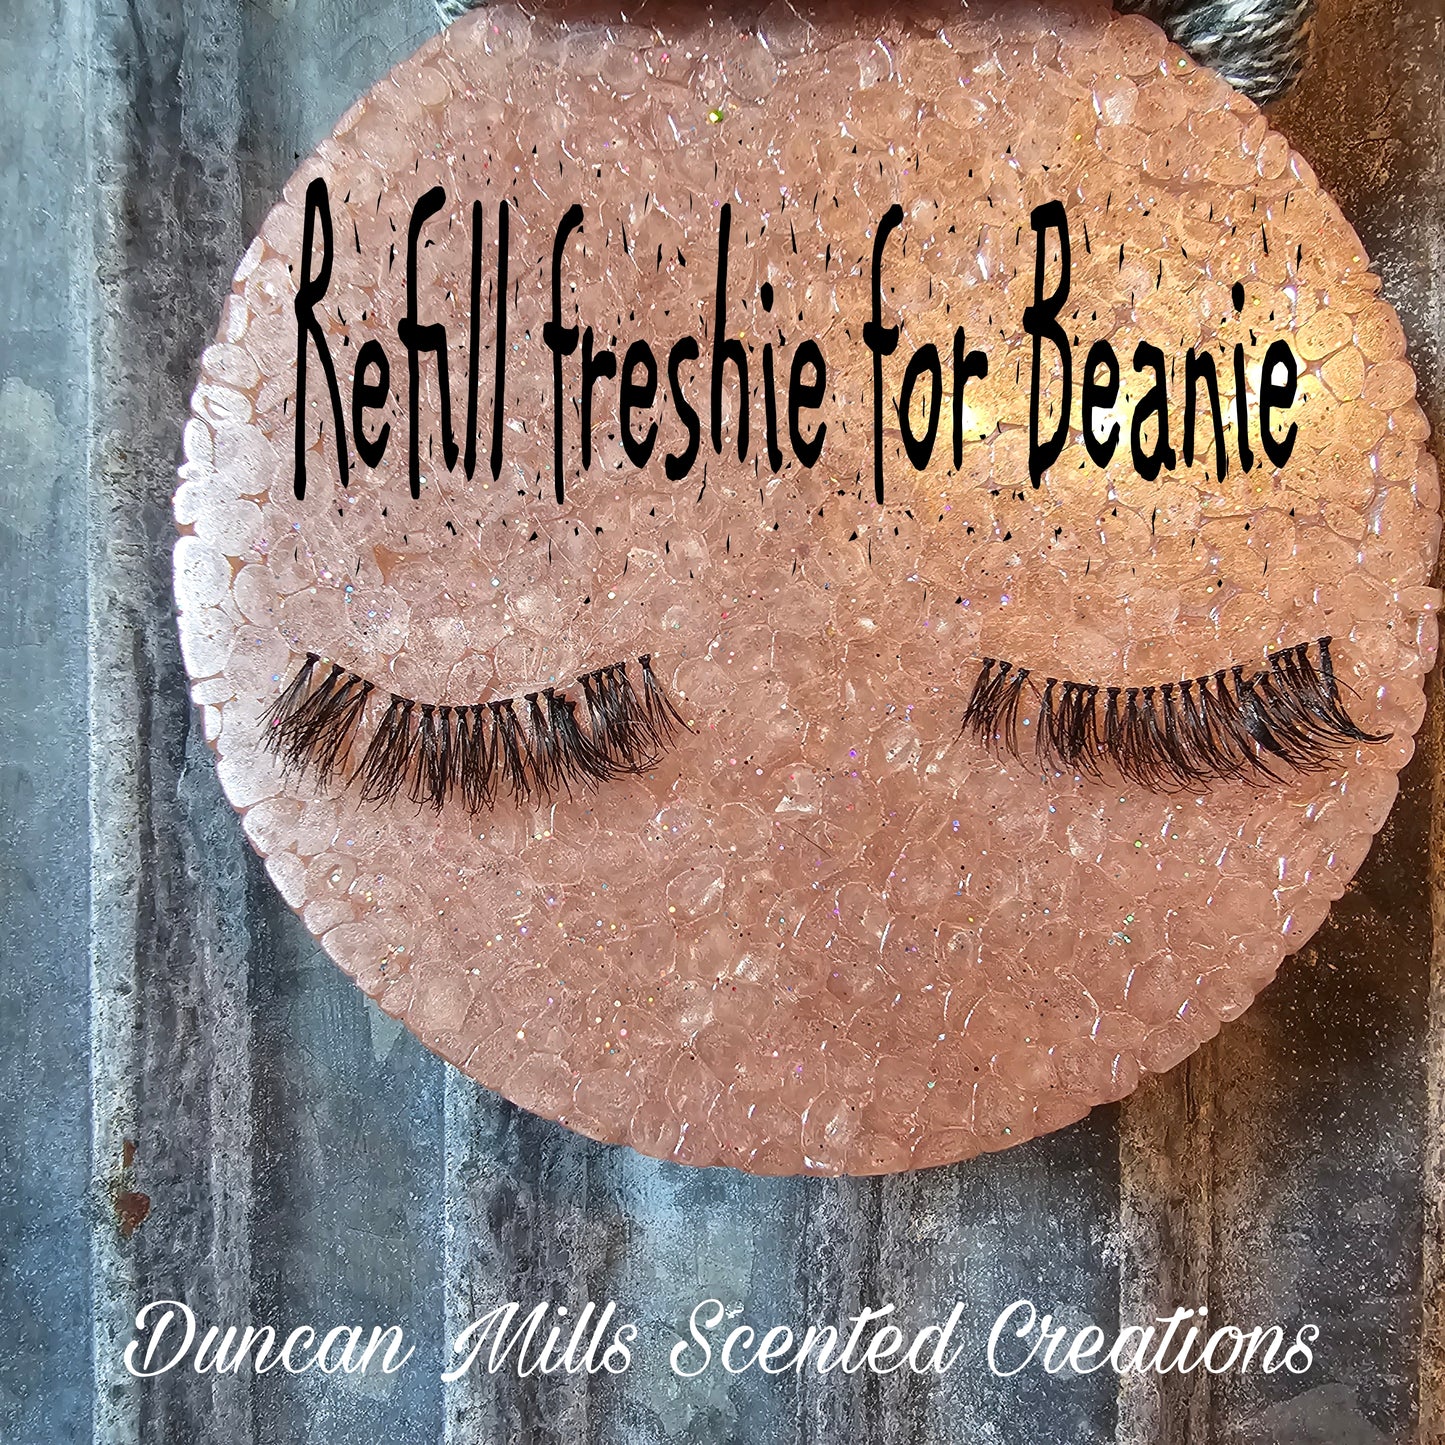 Refill Only for Lashes w/ Beanie Freshie